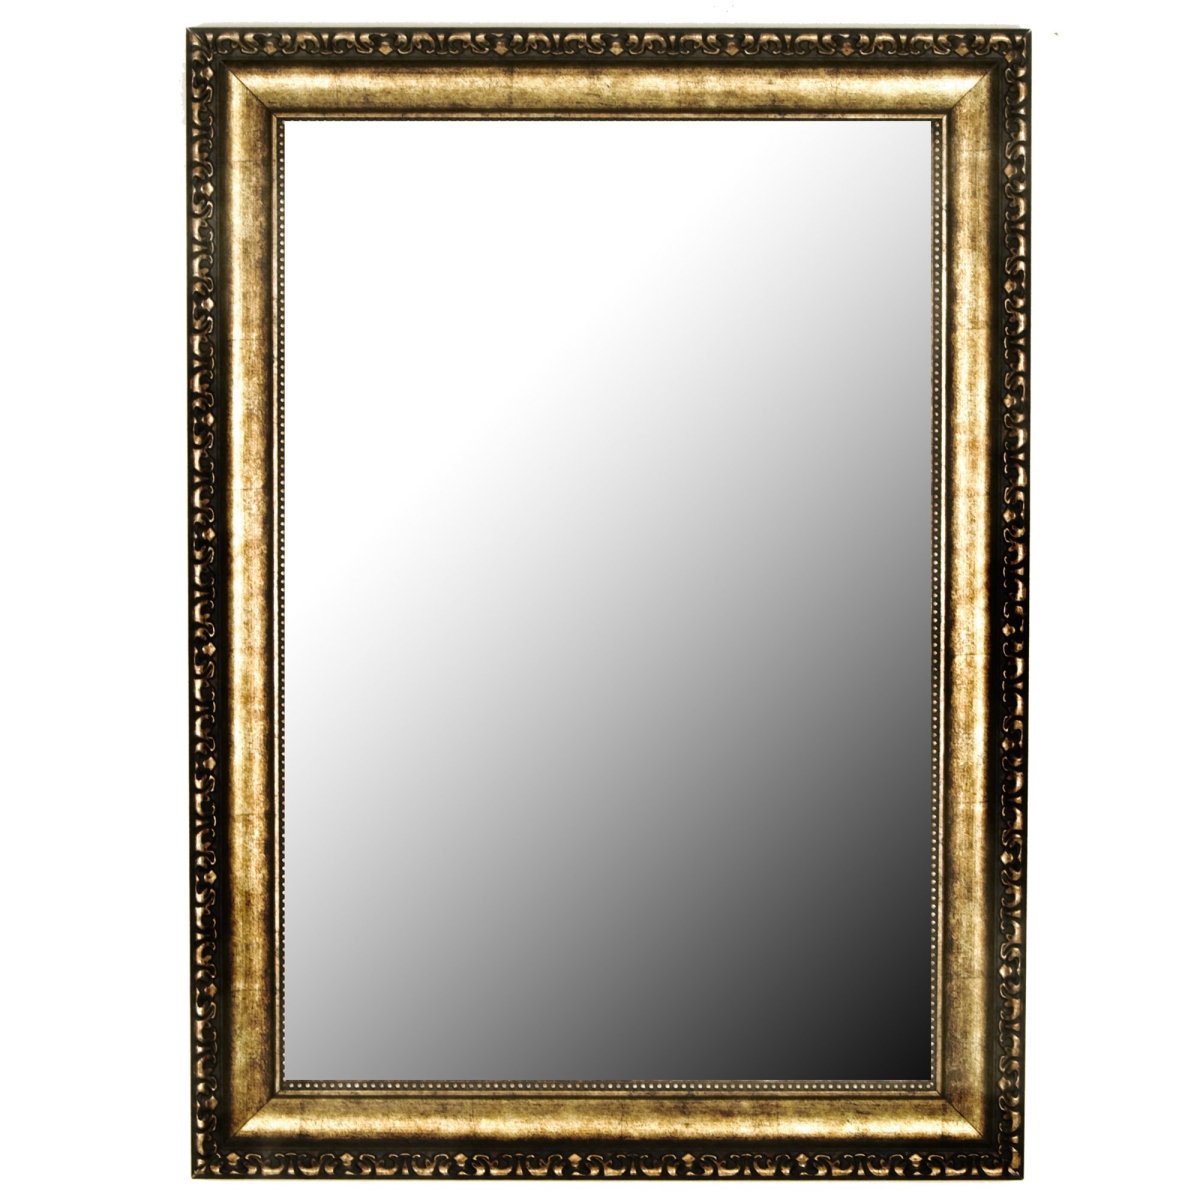 Hitchcock Butterfield 810702 Gold Lavonne Wall Mirror - 30.25 X 42.25 In.